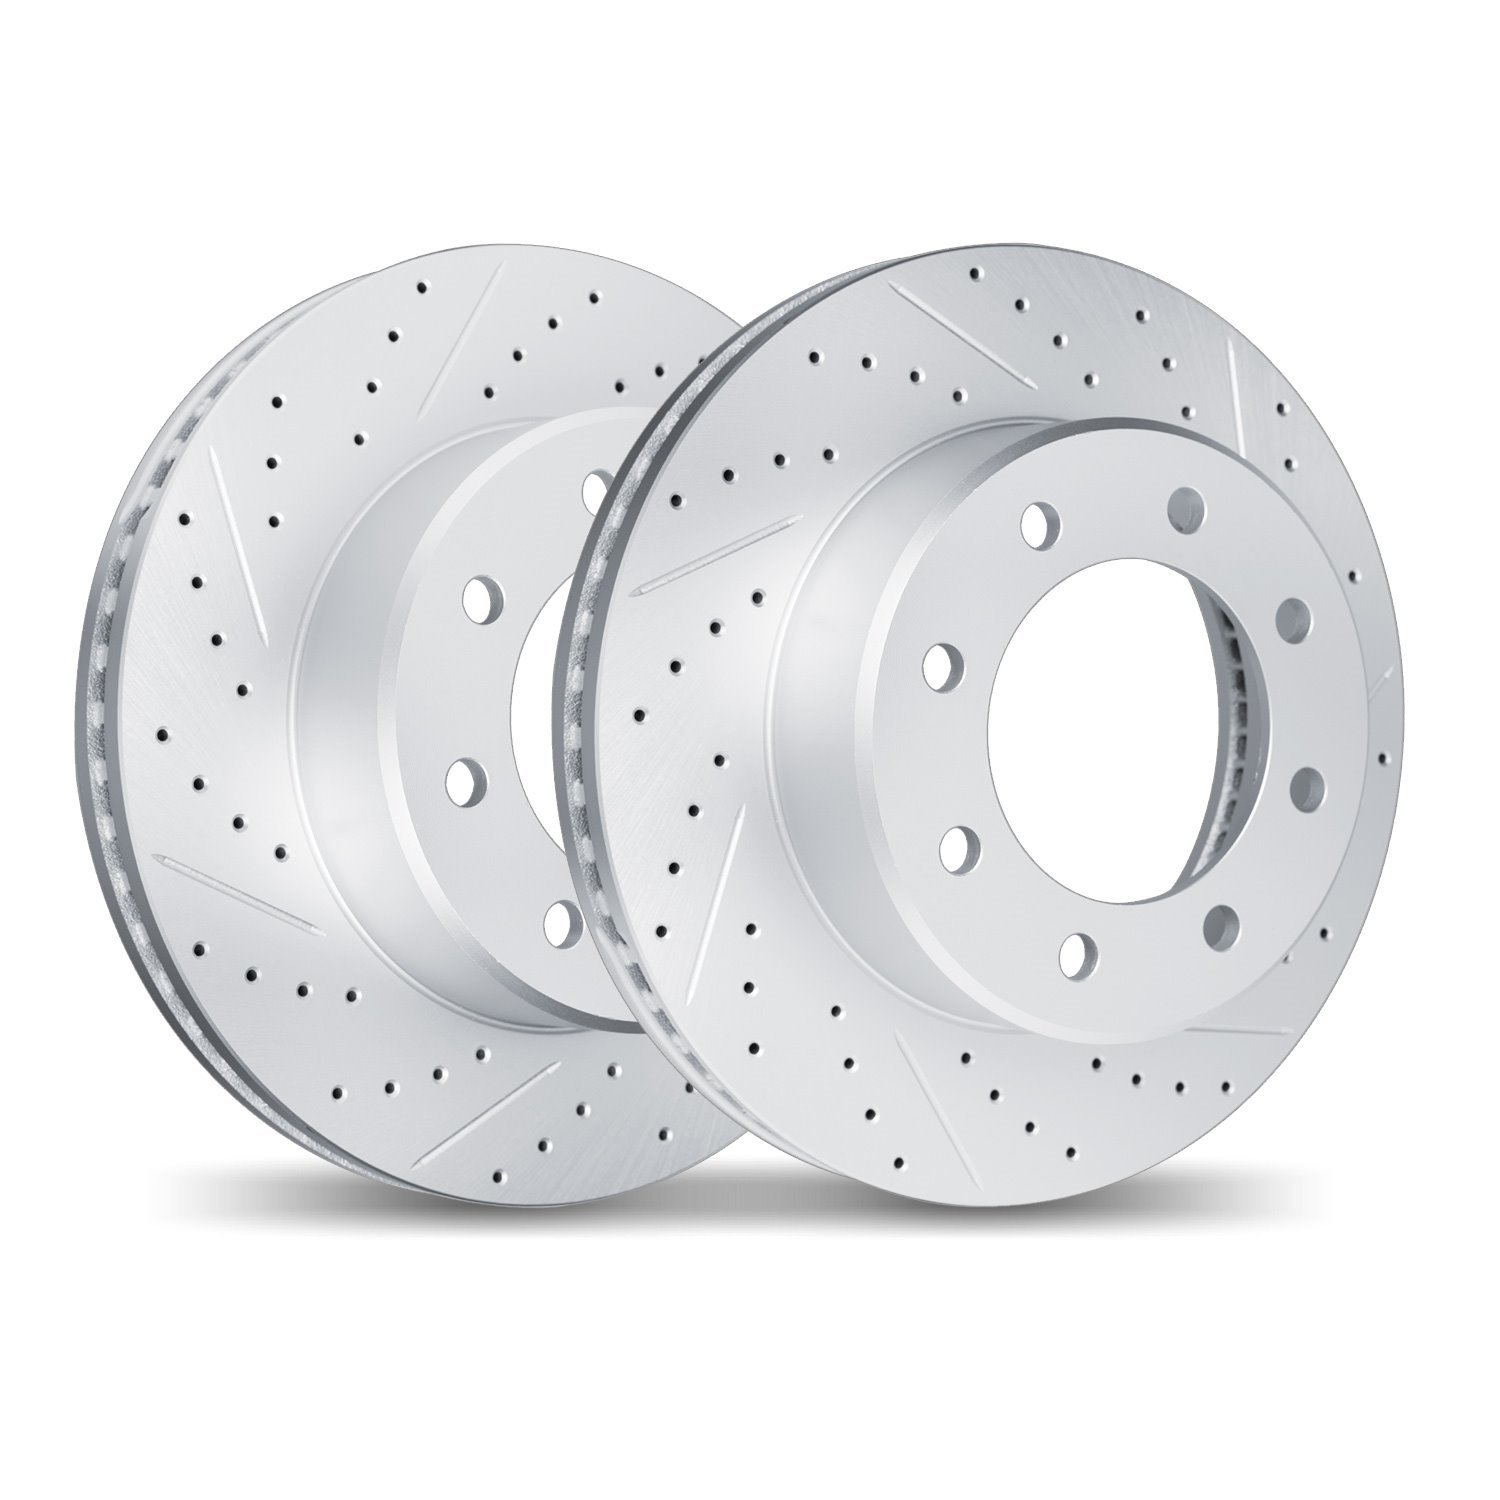 2002-54124 Geoperformance Drilled/Slotted Brake Rotors, 2003-2007 Ford/Lincoln/Mercury/Mazda, Position: Rear